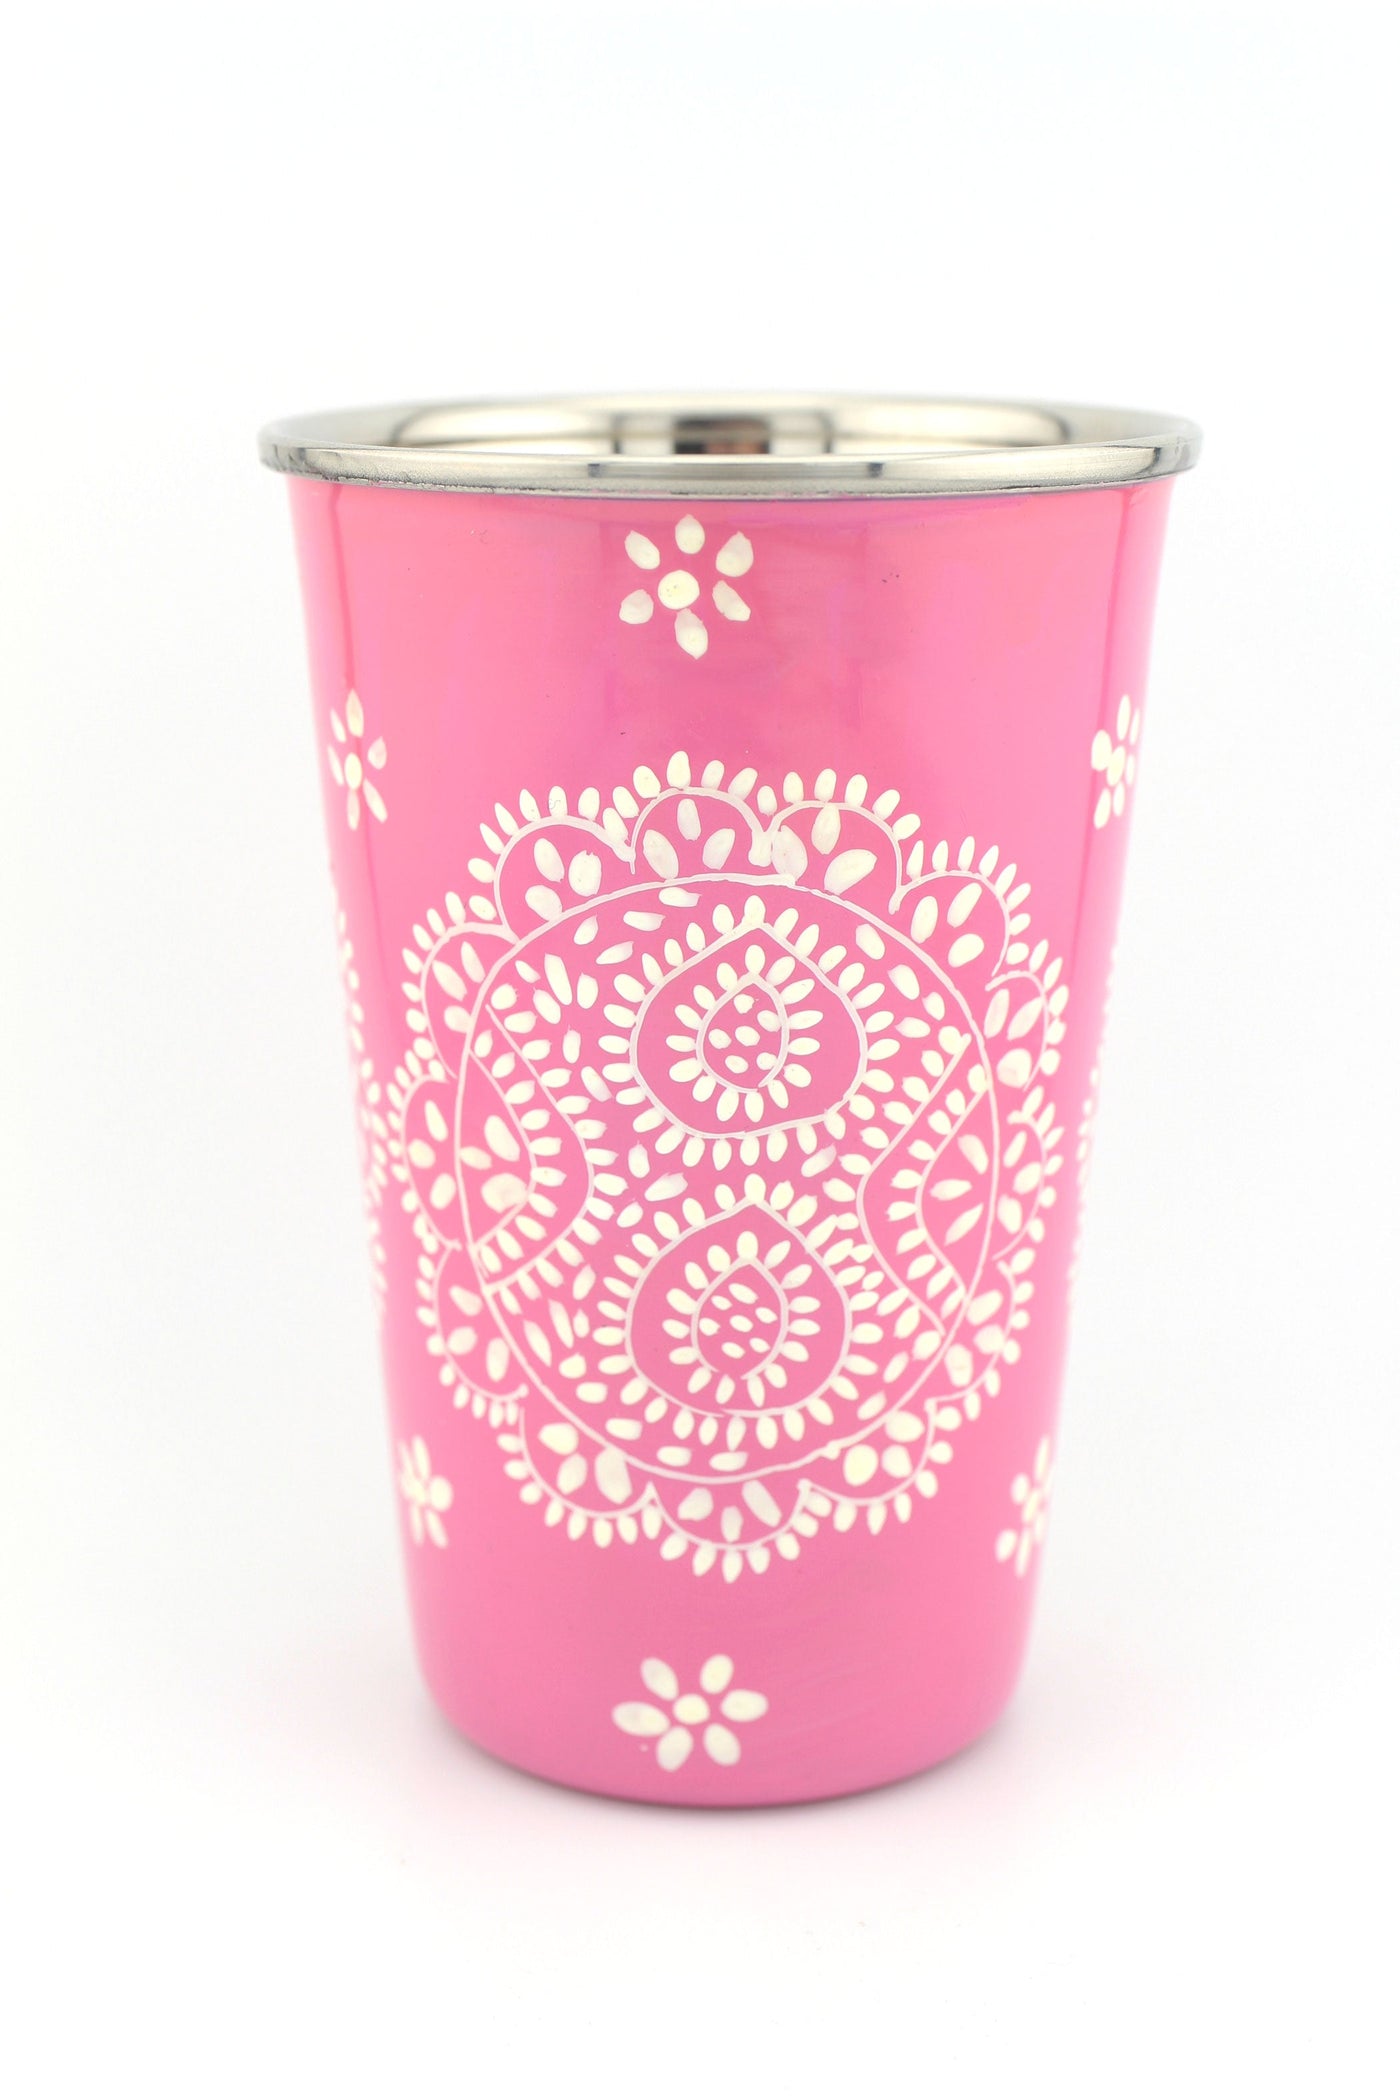 Floral Handpainted Stainless Steel Tumbler Cup, from Kashmir